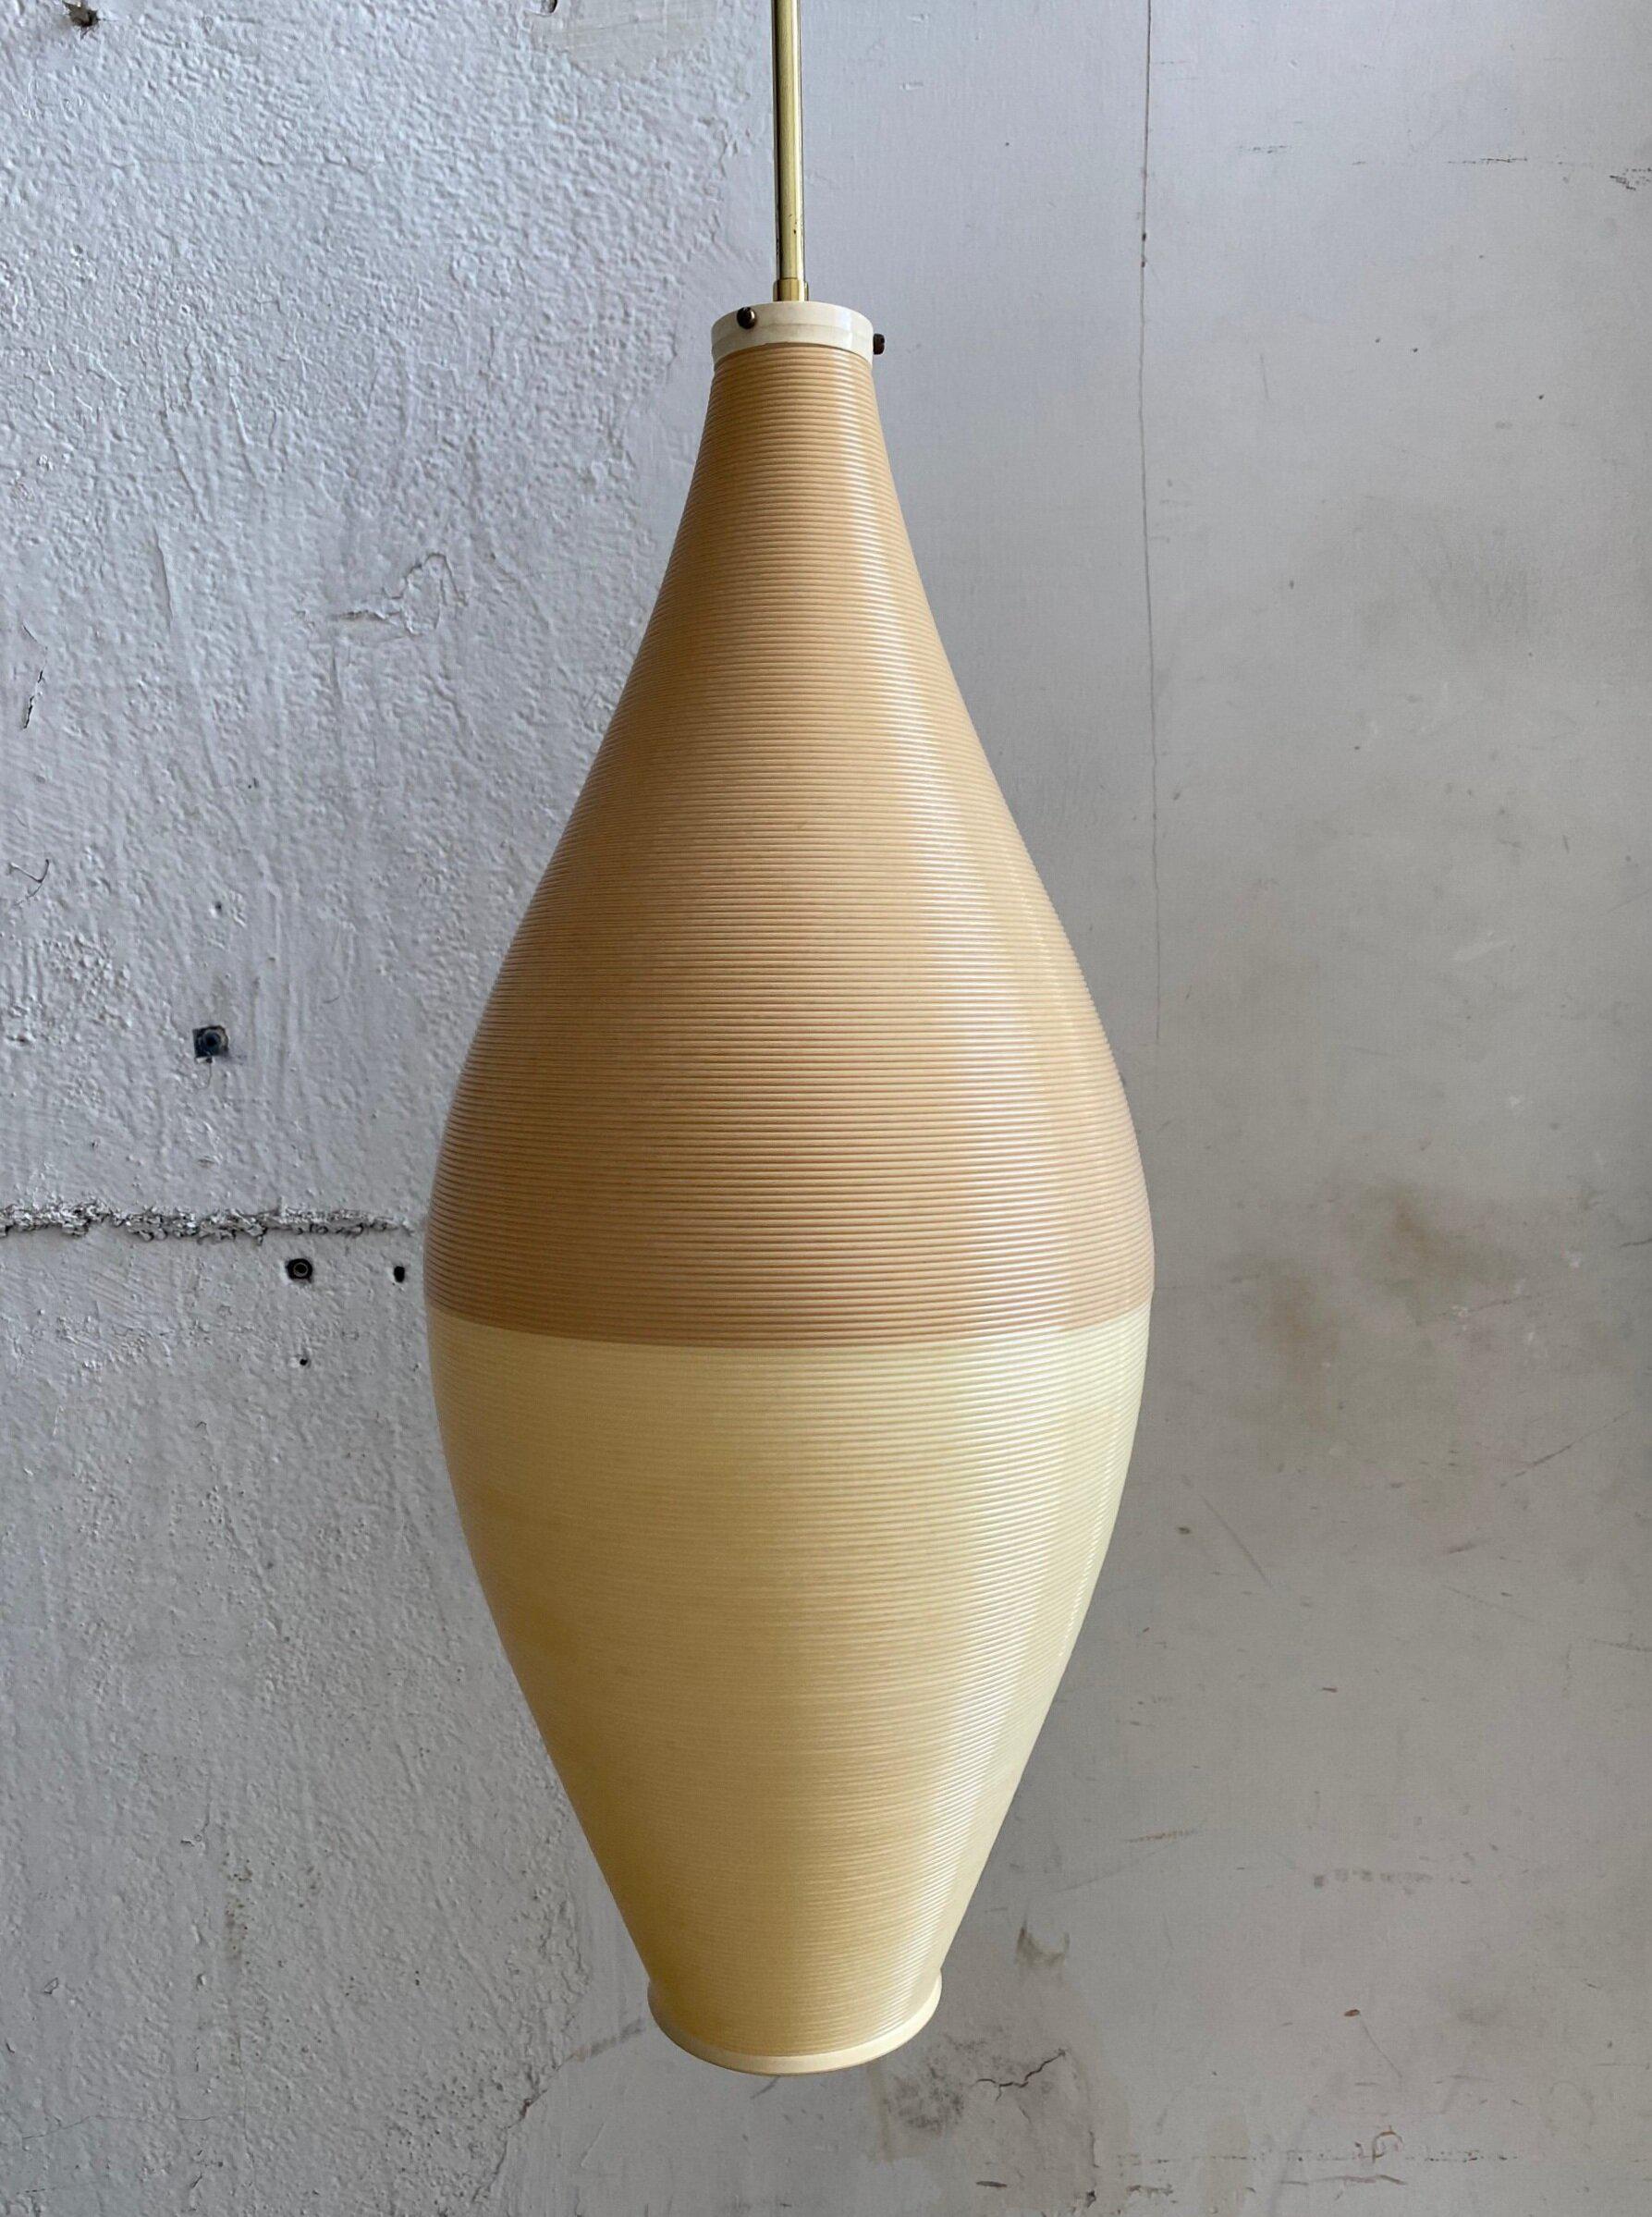 Vintage Mid-Century Rotaflex Pendant Lamp For Yasha Heifetz. Shade is ribbed two-tone cream and beige hand-spun cellulose acetate. Cone shaped shade with brass fixture hardware. Circa 1950s. Produces a beautiful warm glow when lit. A very rare and